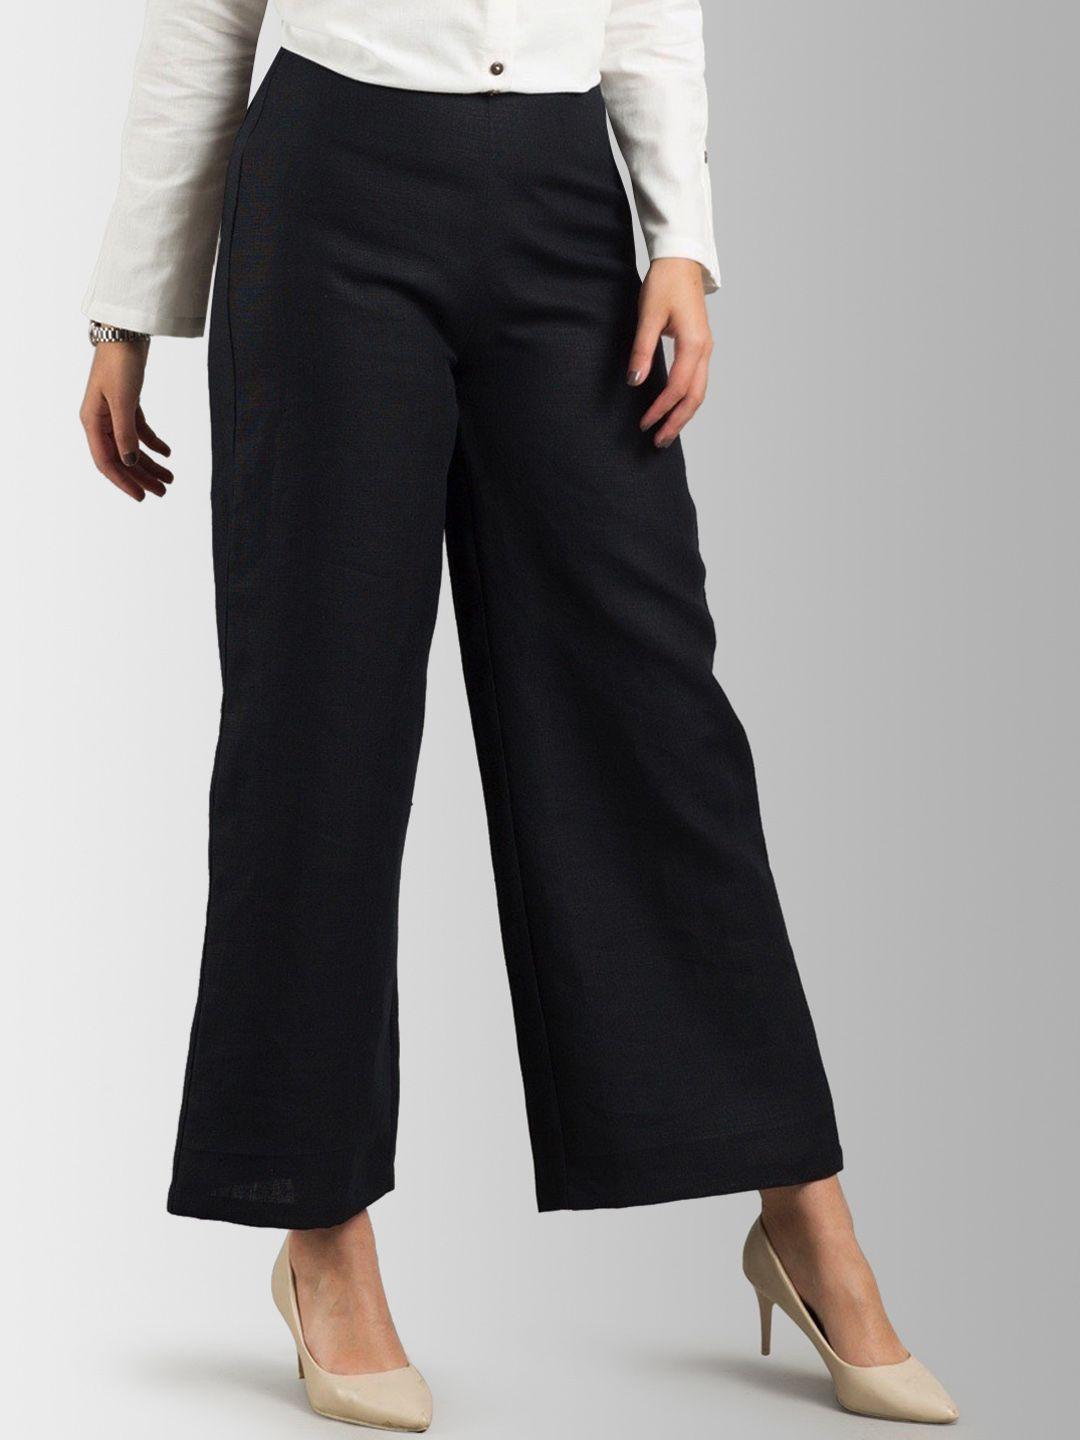 fablestreet women black flared solid parallel trousers